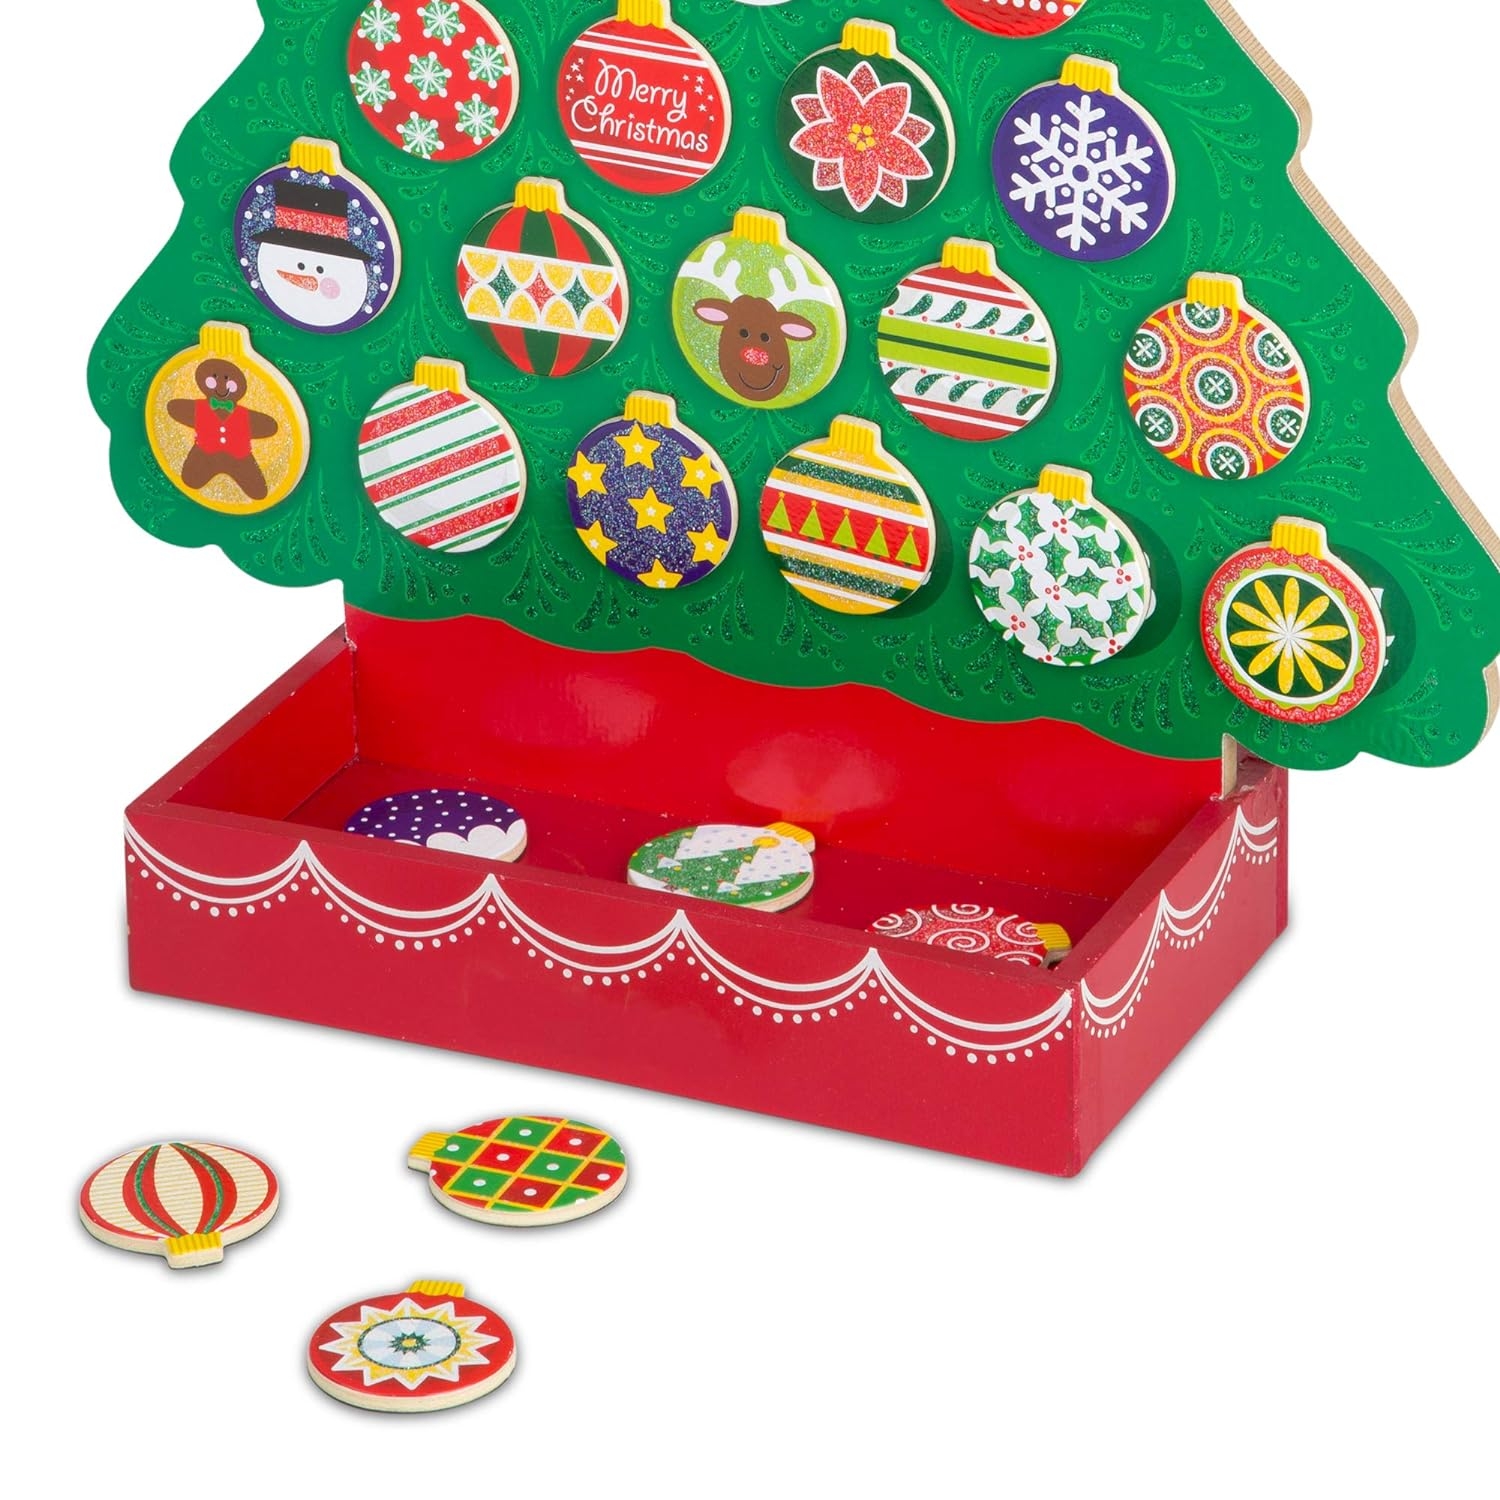 Melissa & Doug Countdown to Christmas Wooden Advent Calendar (Seasonal & Religious, Magnetic Tree, 25 Magnets, Great Gift for Girls and Boys - Best for 3, 4, 5, 6 and 7 Year Olds)